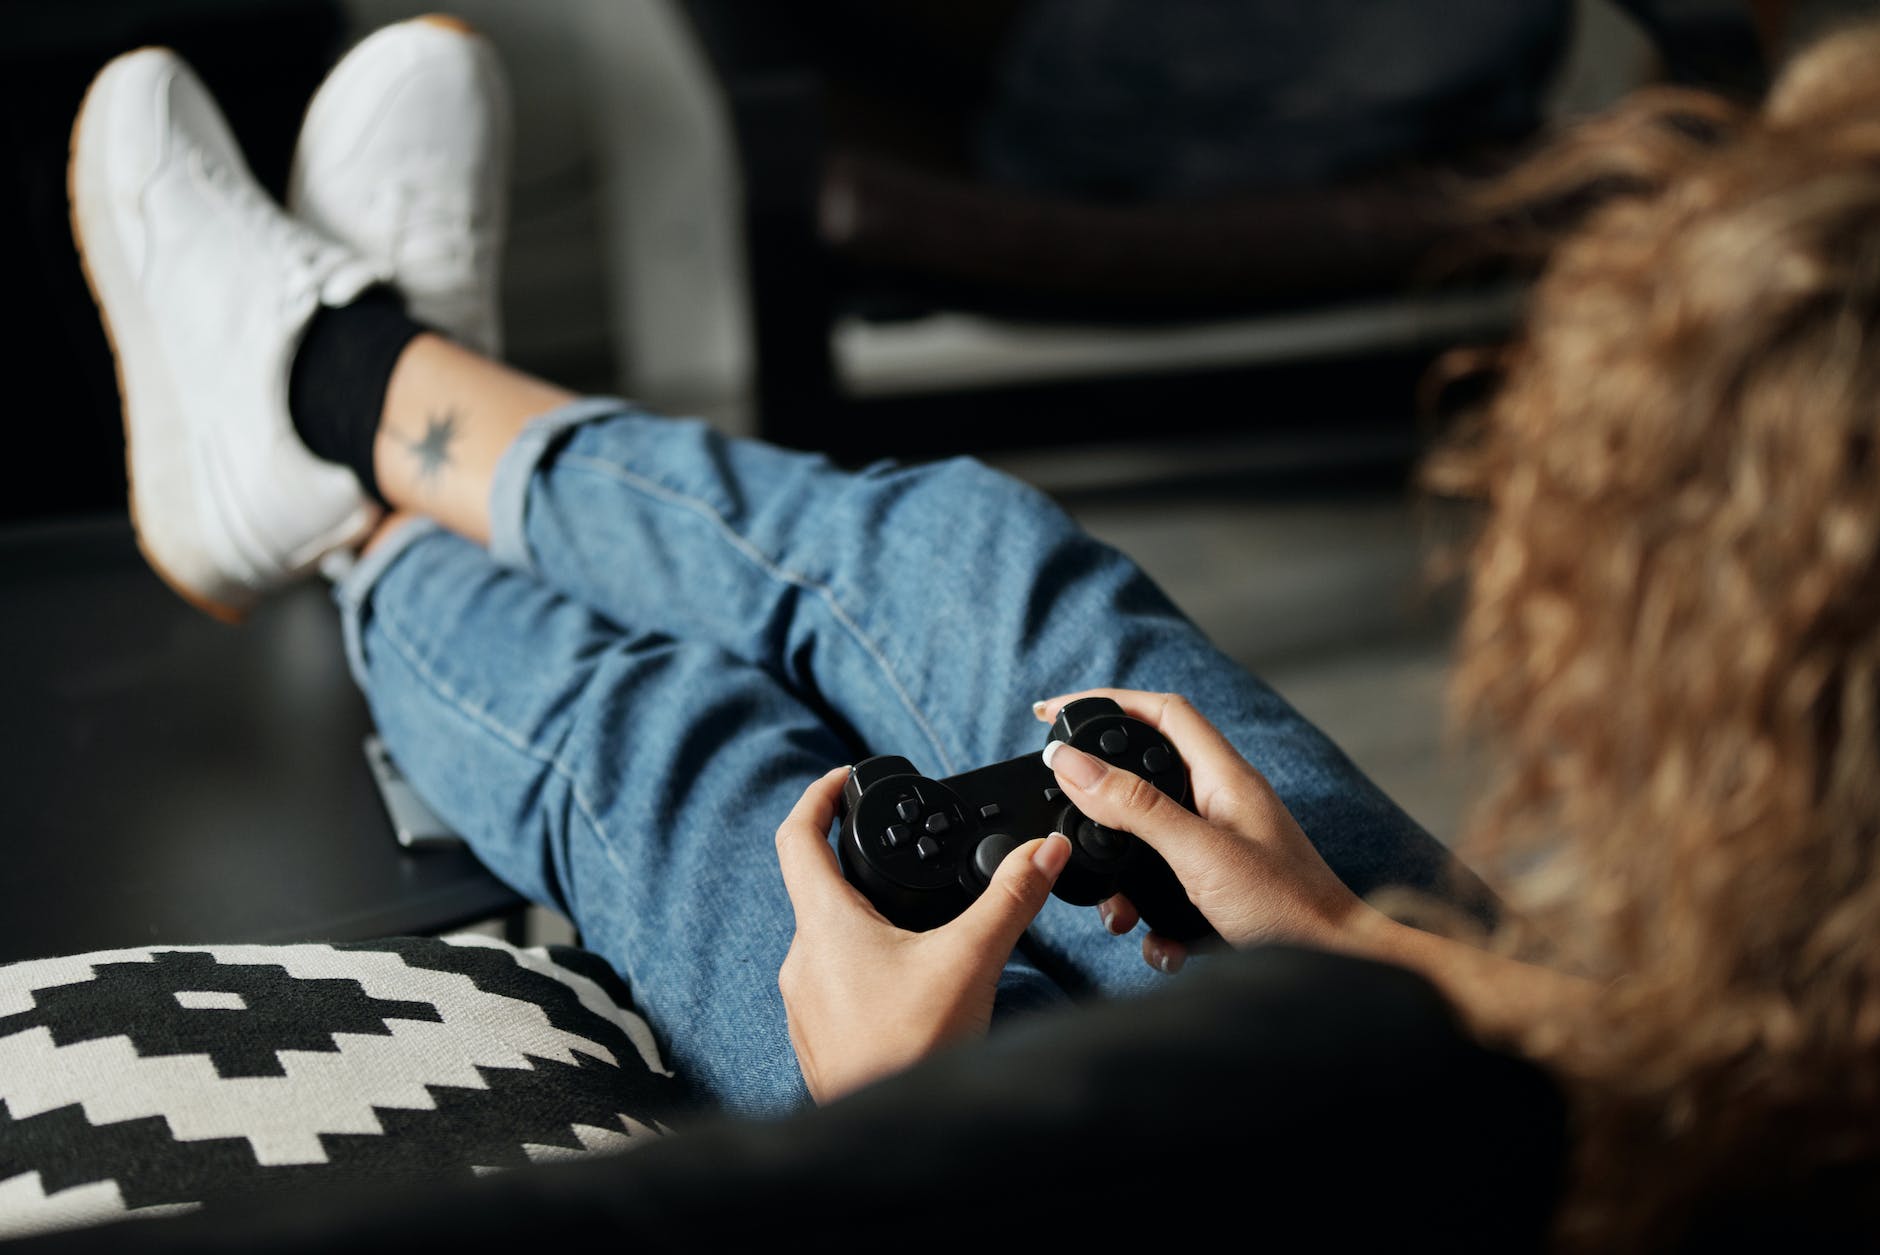 close up photo of person playing video game